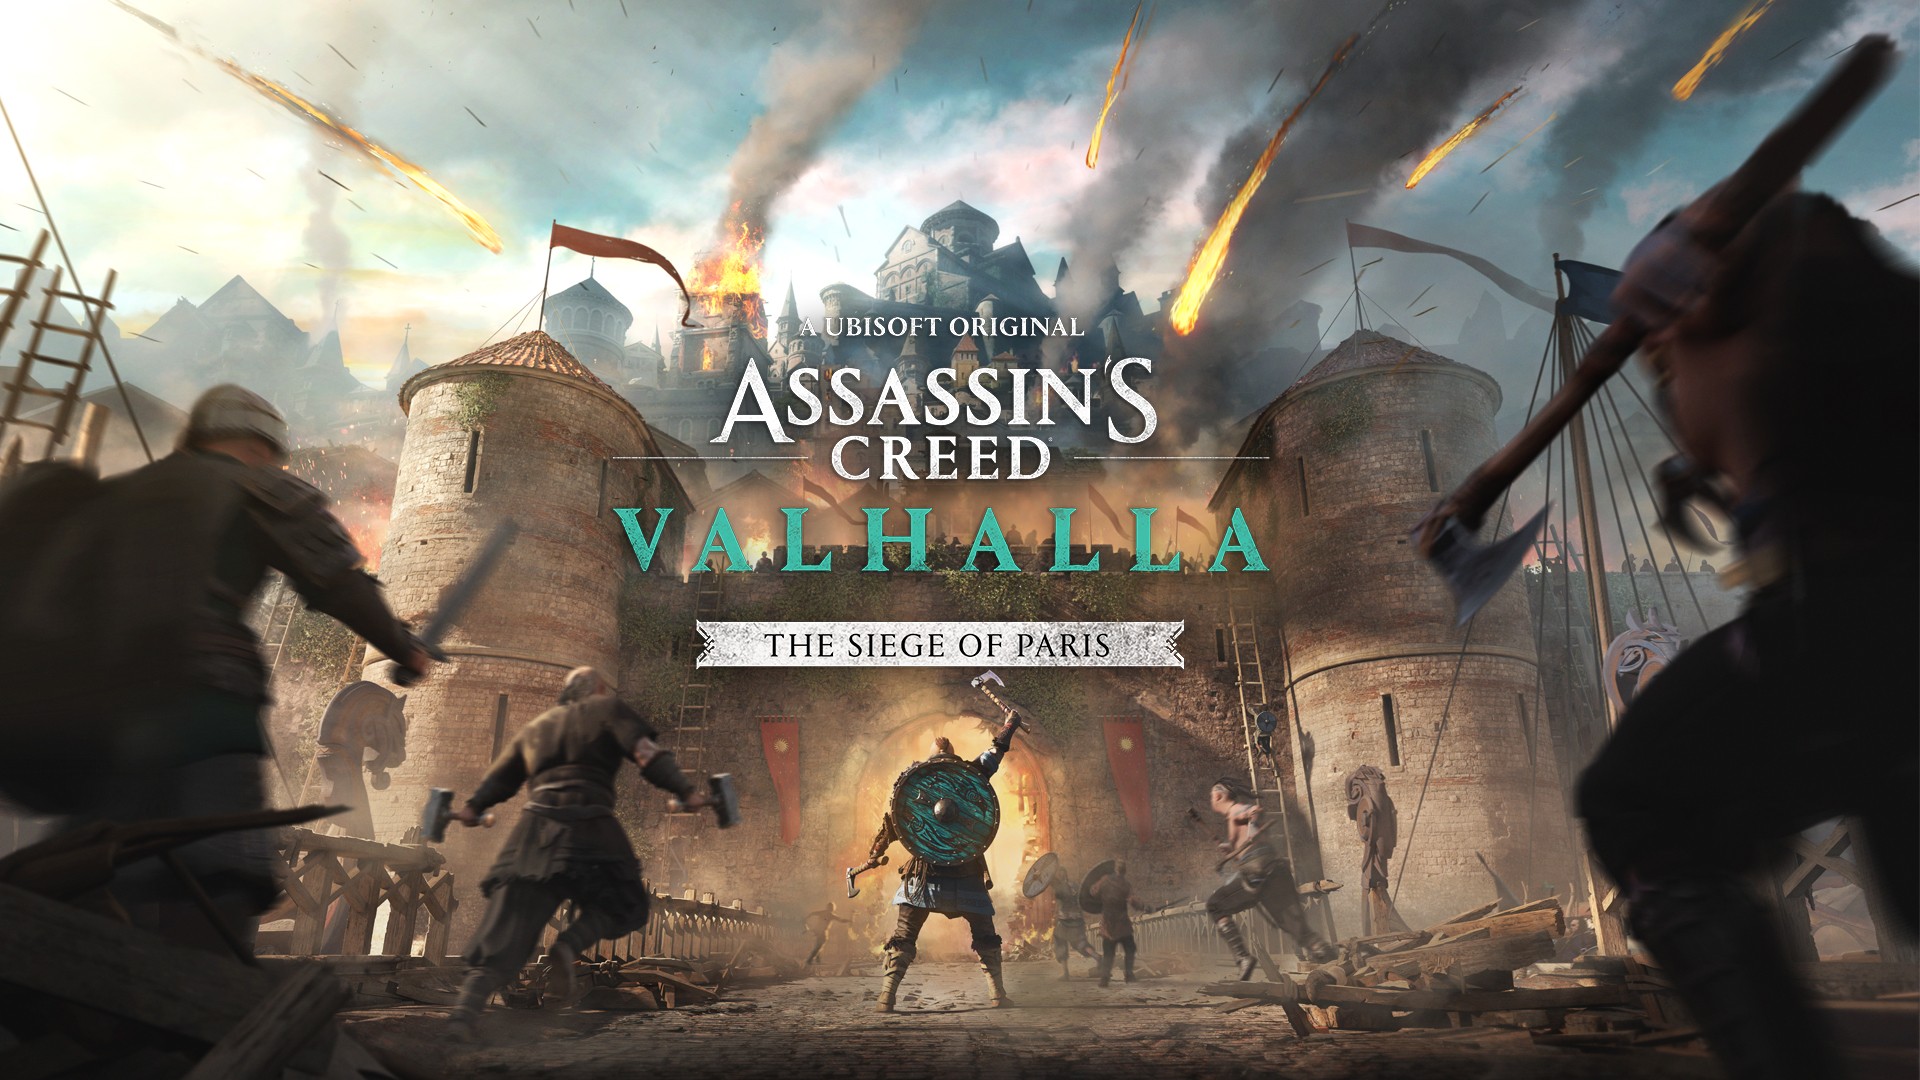 Assassin’s Creed Valhalla Announces A Second Year of Content